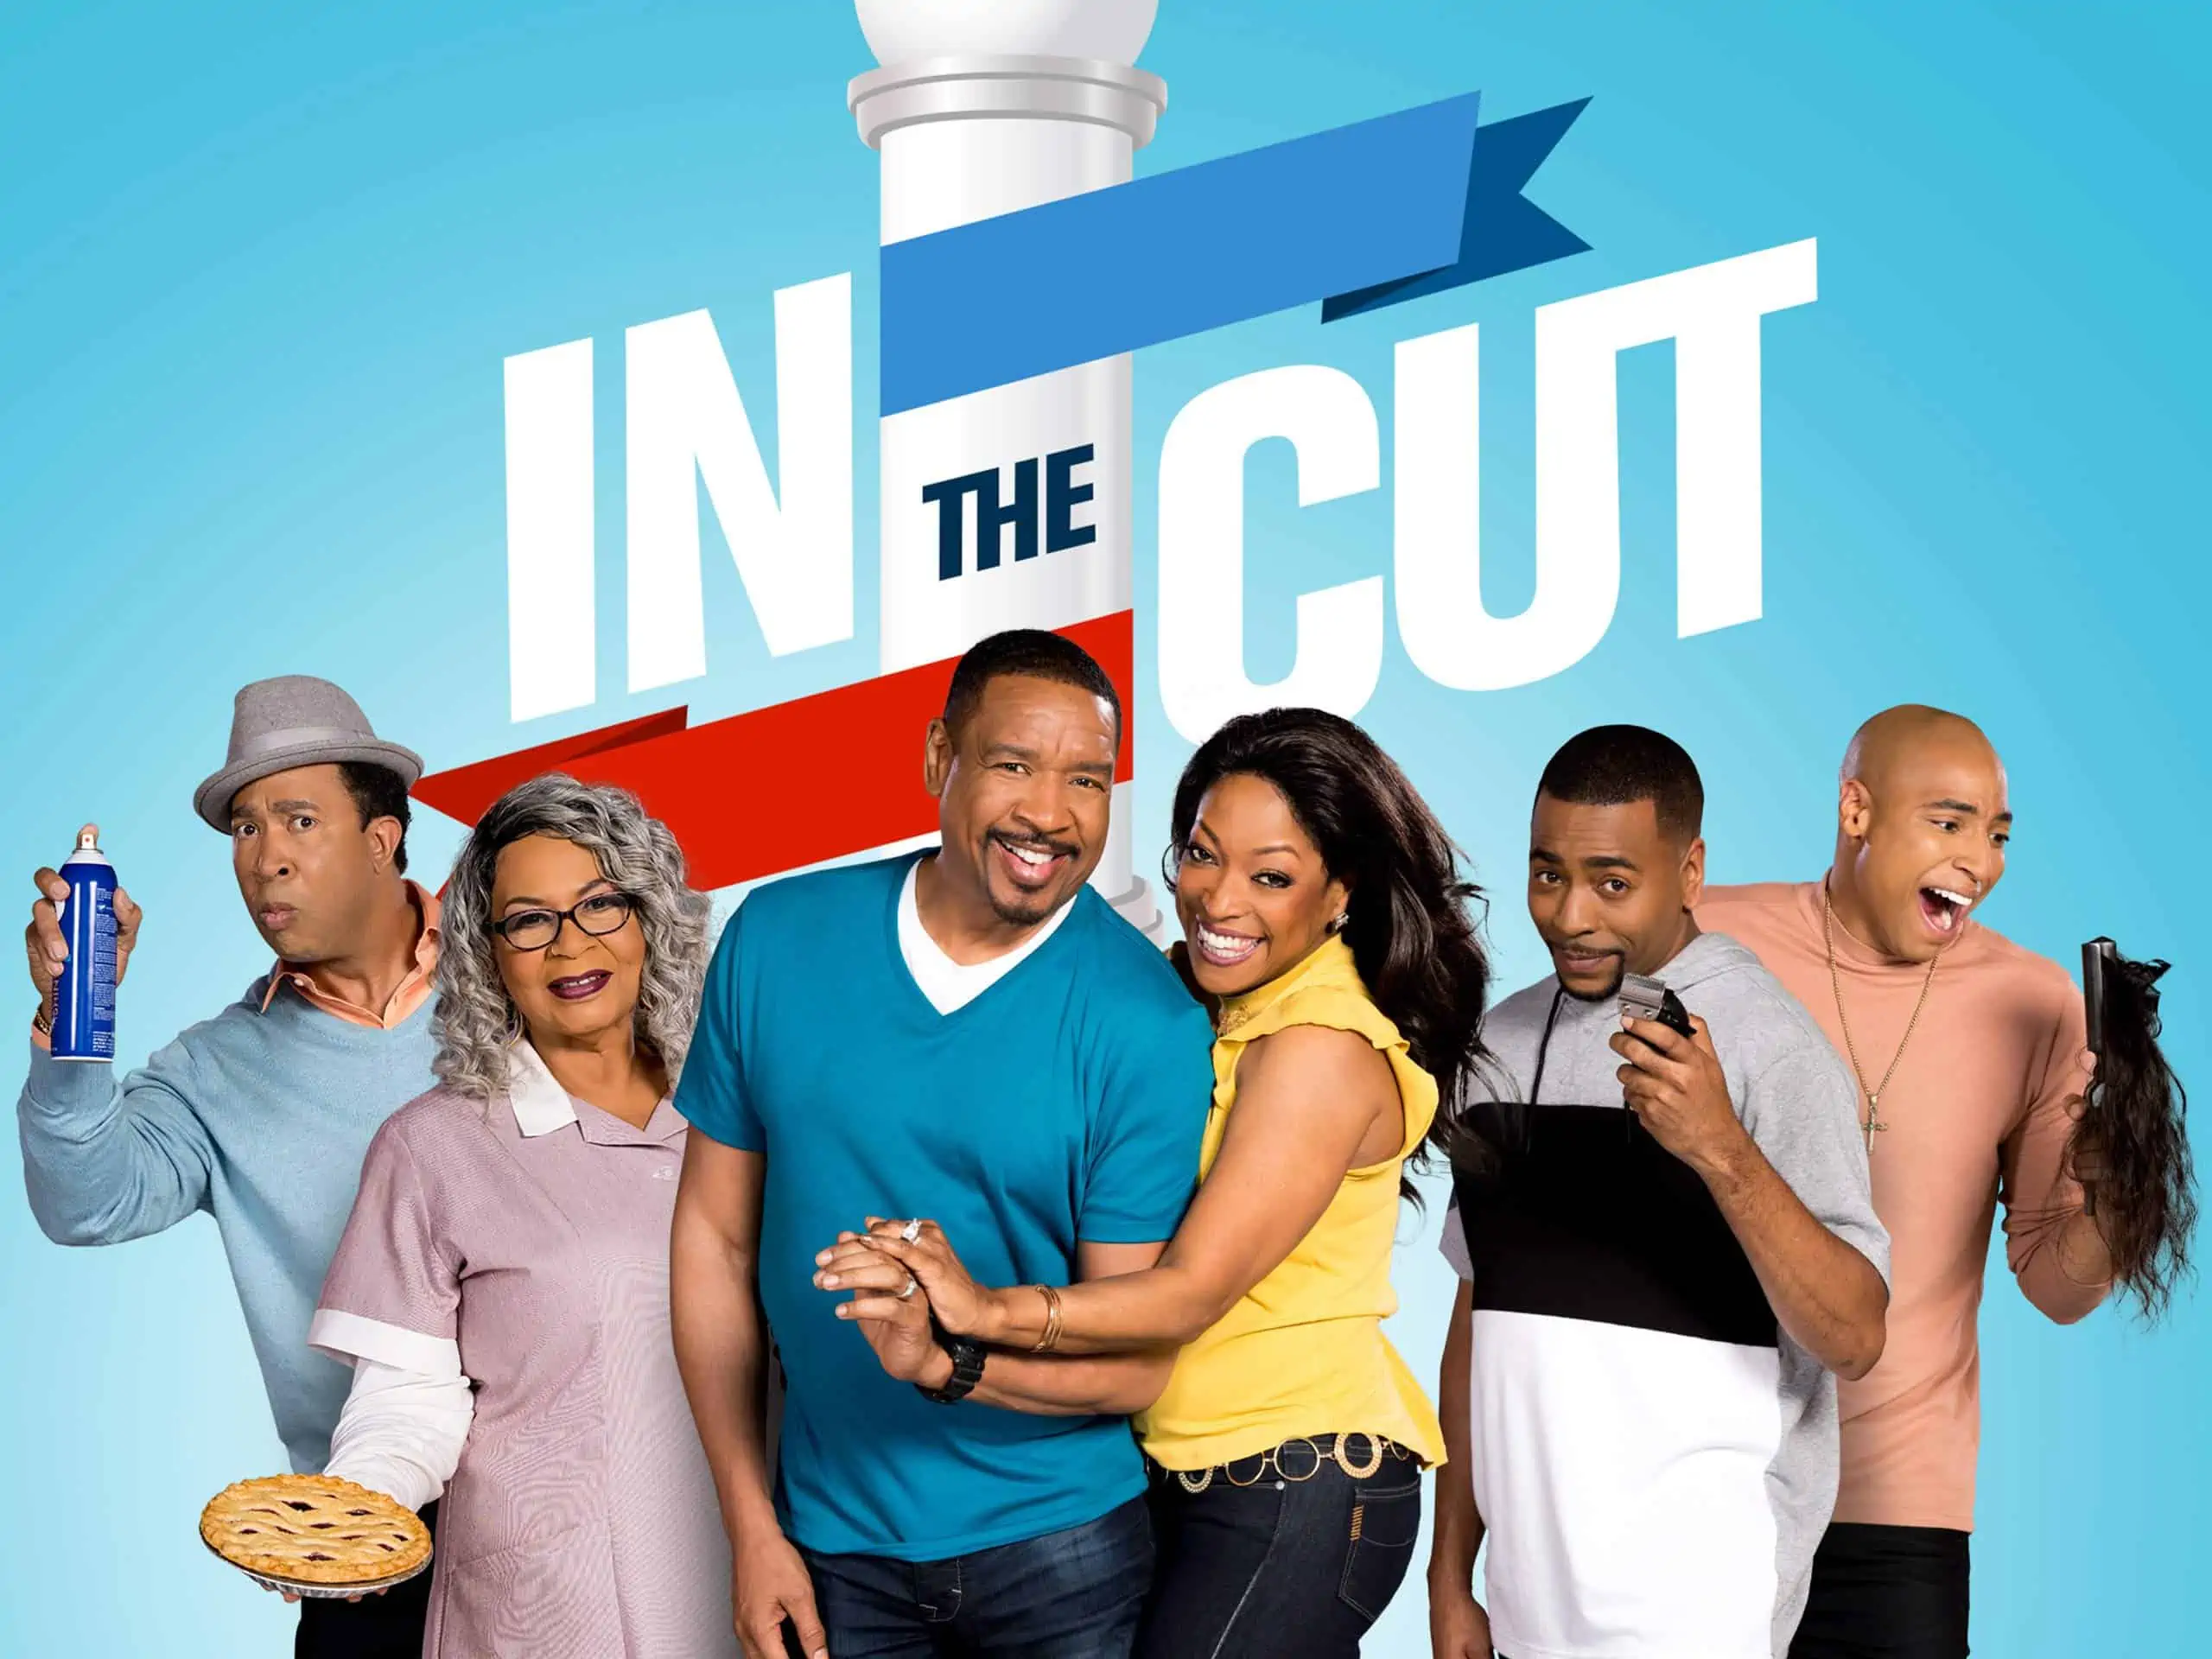 All About The Latest Season of “In The Cut”